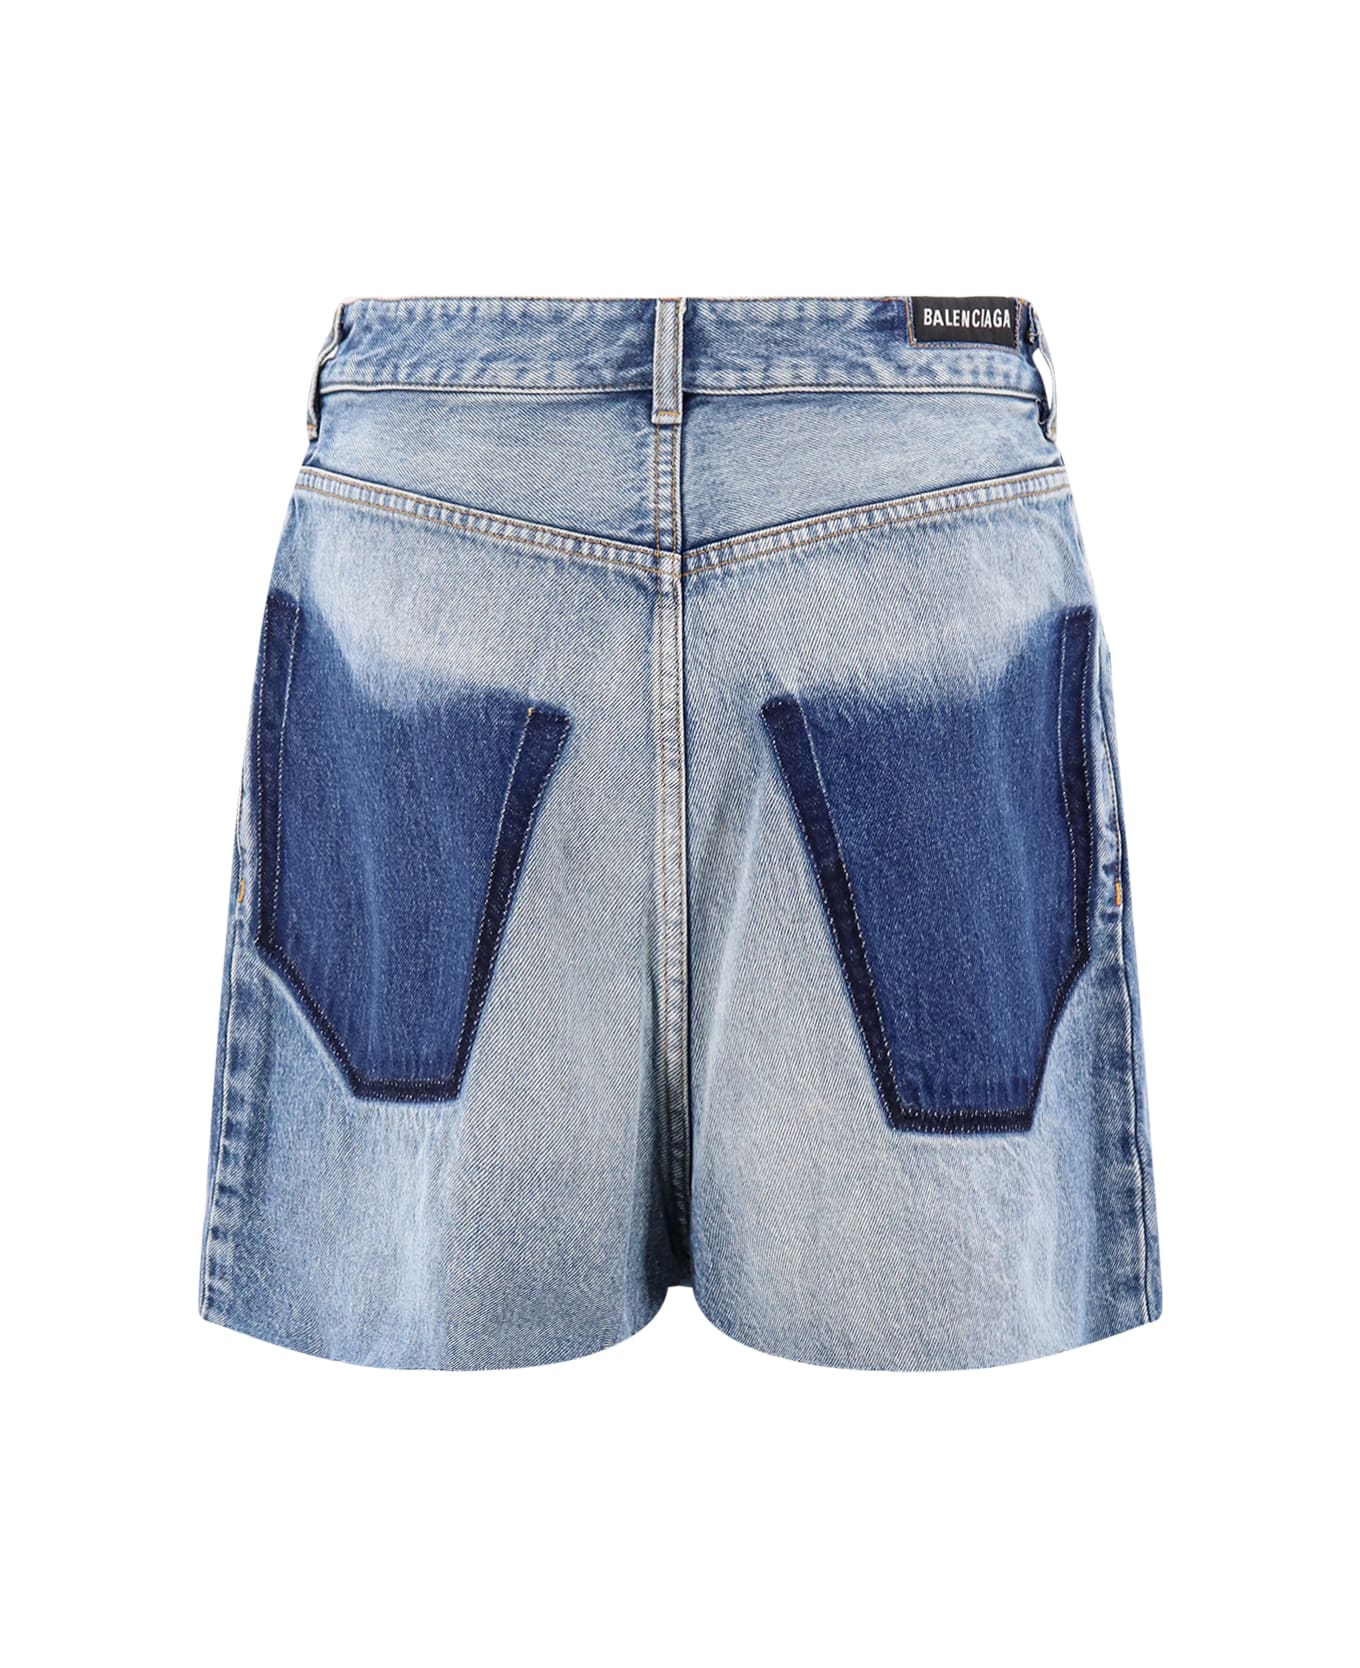 Balenciaga Mini-skirt With Patch Pockets And Raw Edge - Blue